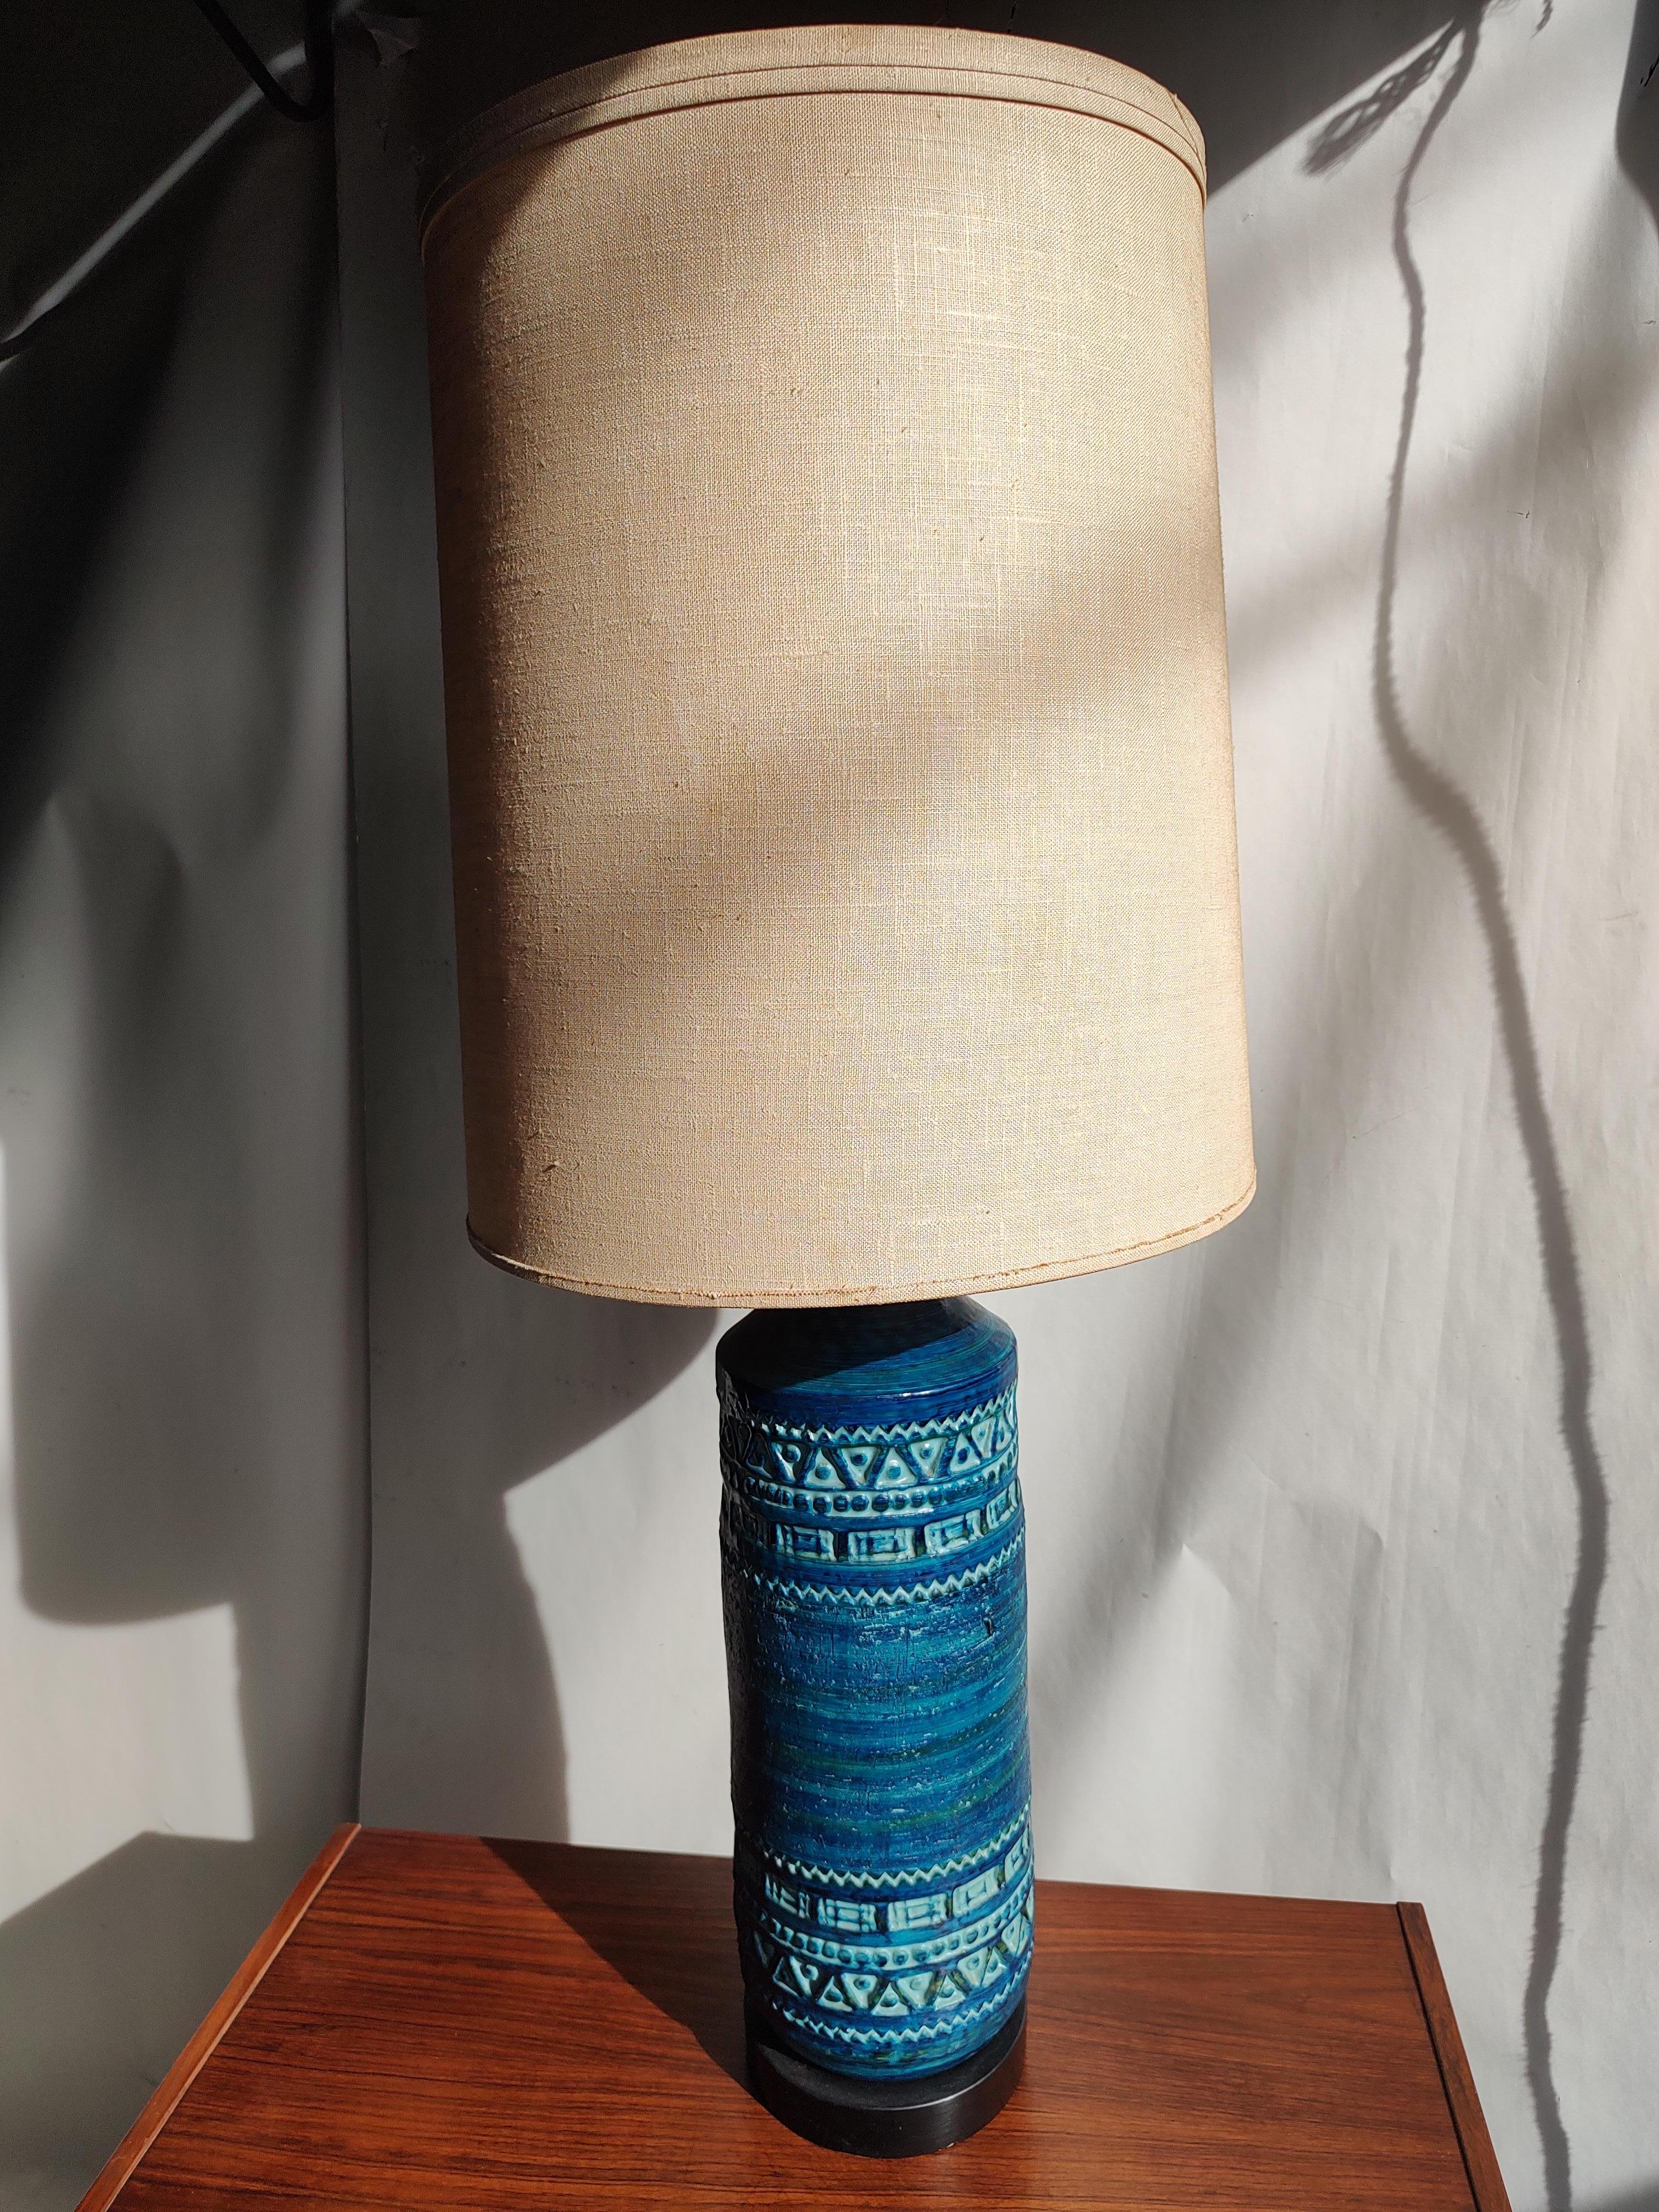 Fabulous and in excellent condition with the correct size lamp shade. Stunning Rimini Blue such a serene color with mid century impressions in the pottery. A beautiful sculpted lamp. Shade is in good condition. Wiring is sound. Hgt to top of socket